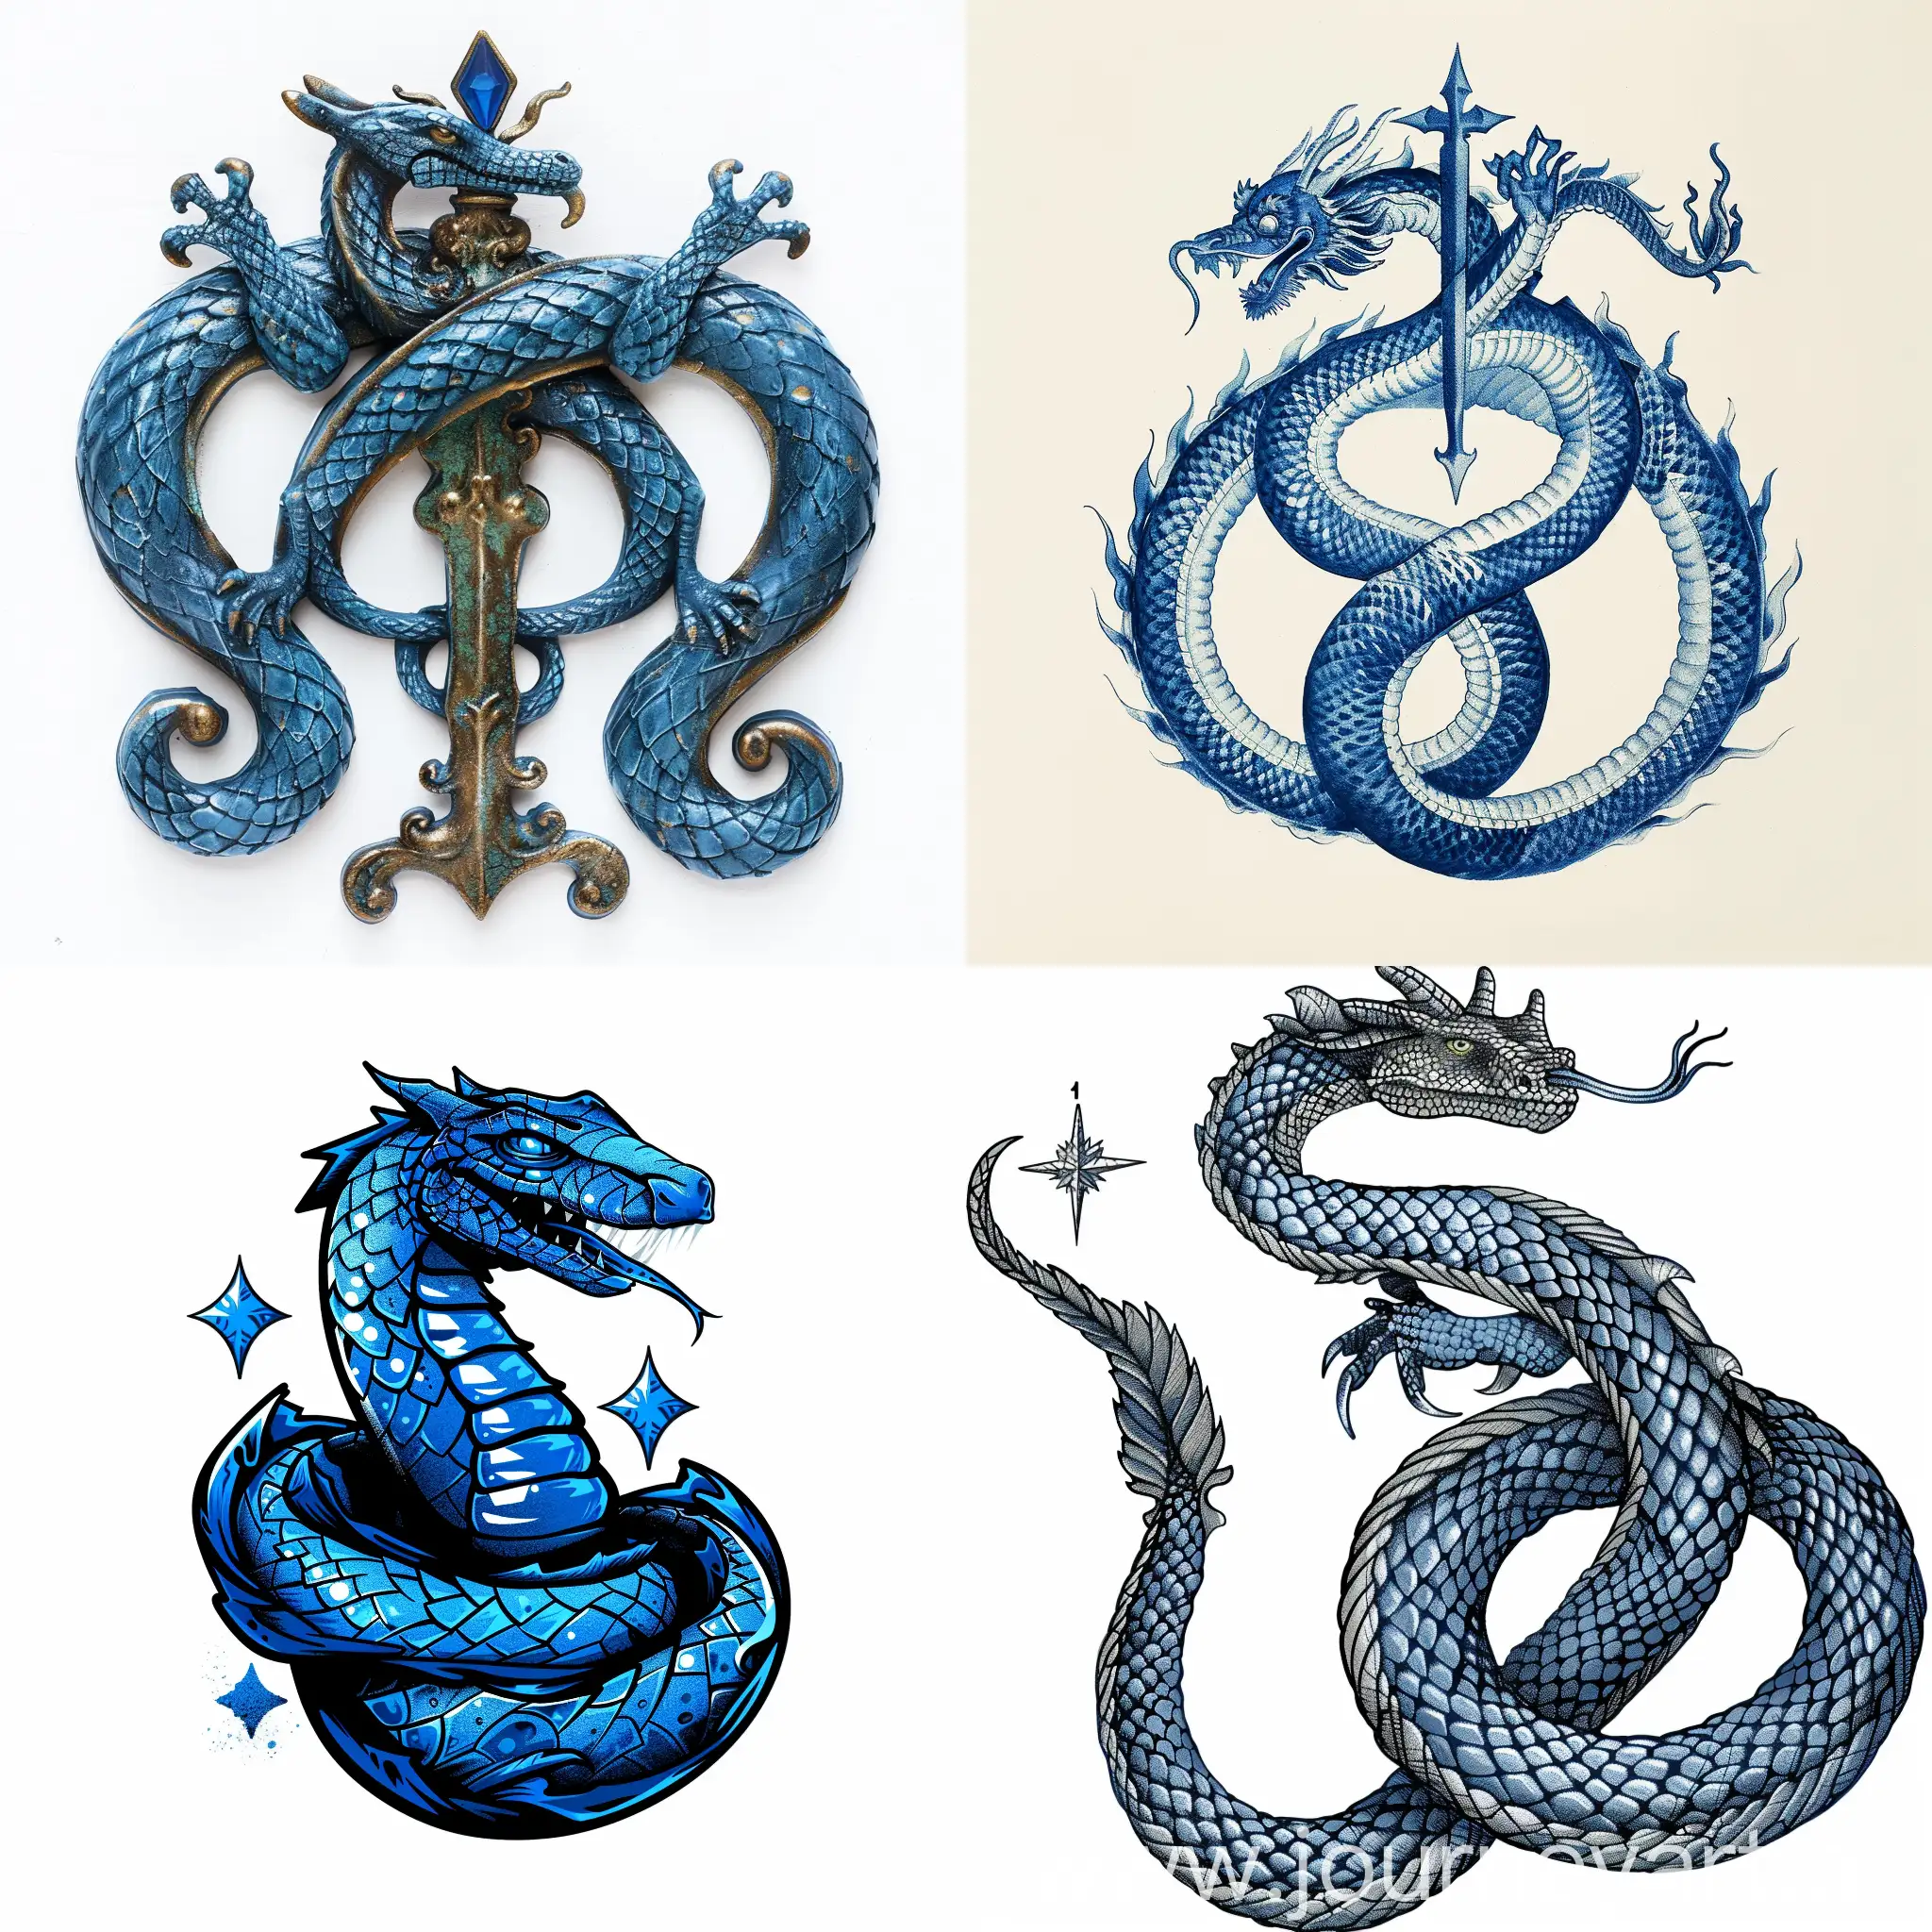 Minimalistic-Blue-Serpent-Coat-of-Arms-on-White-Background